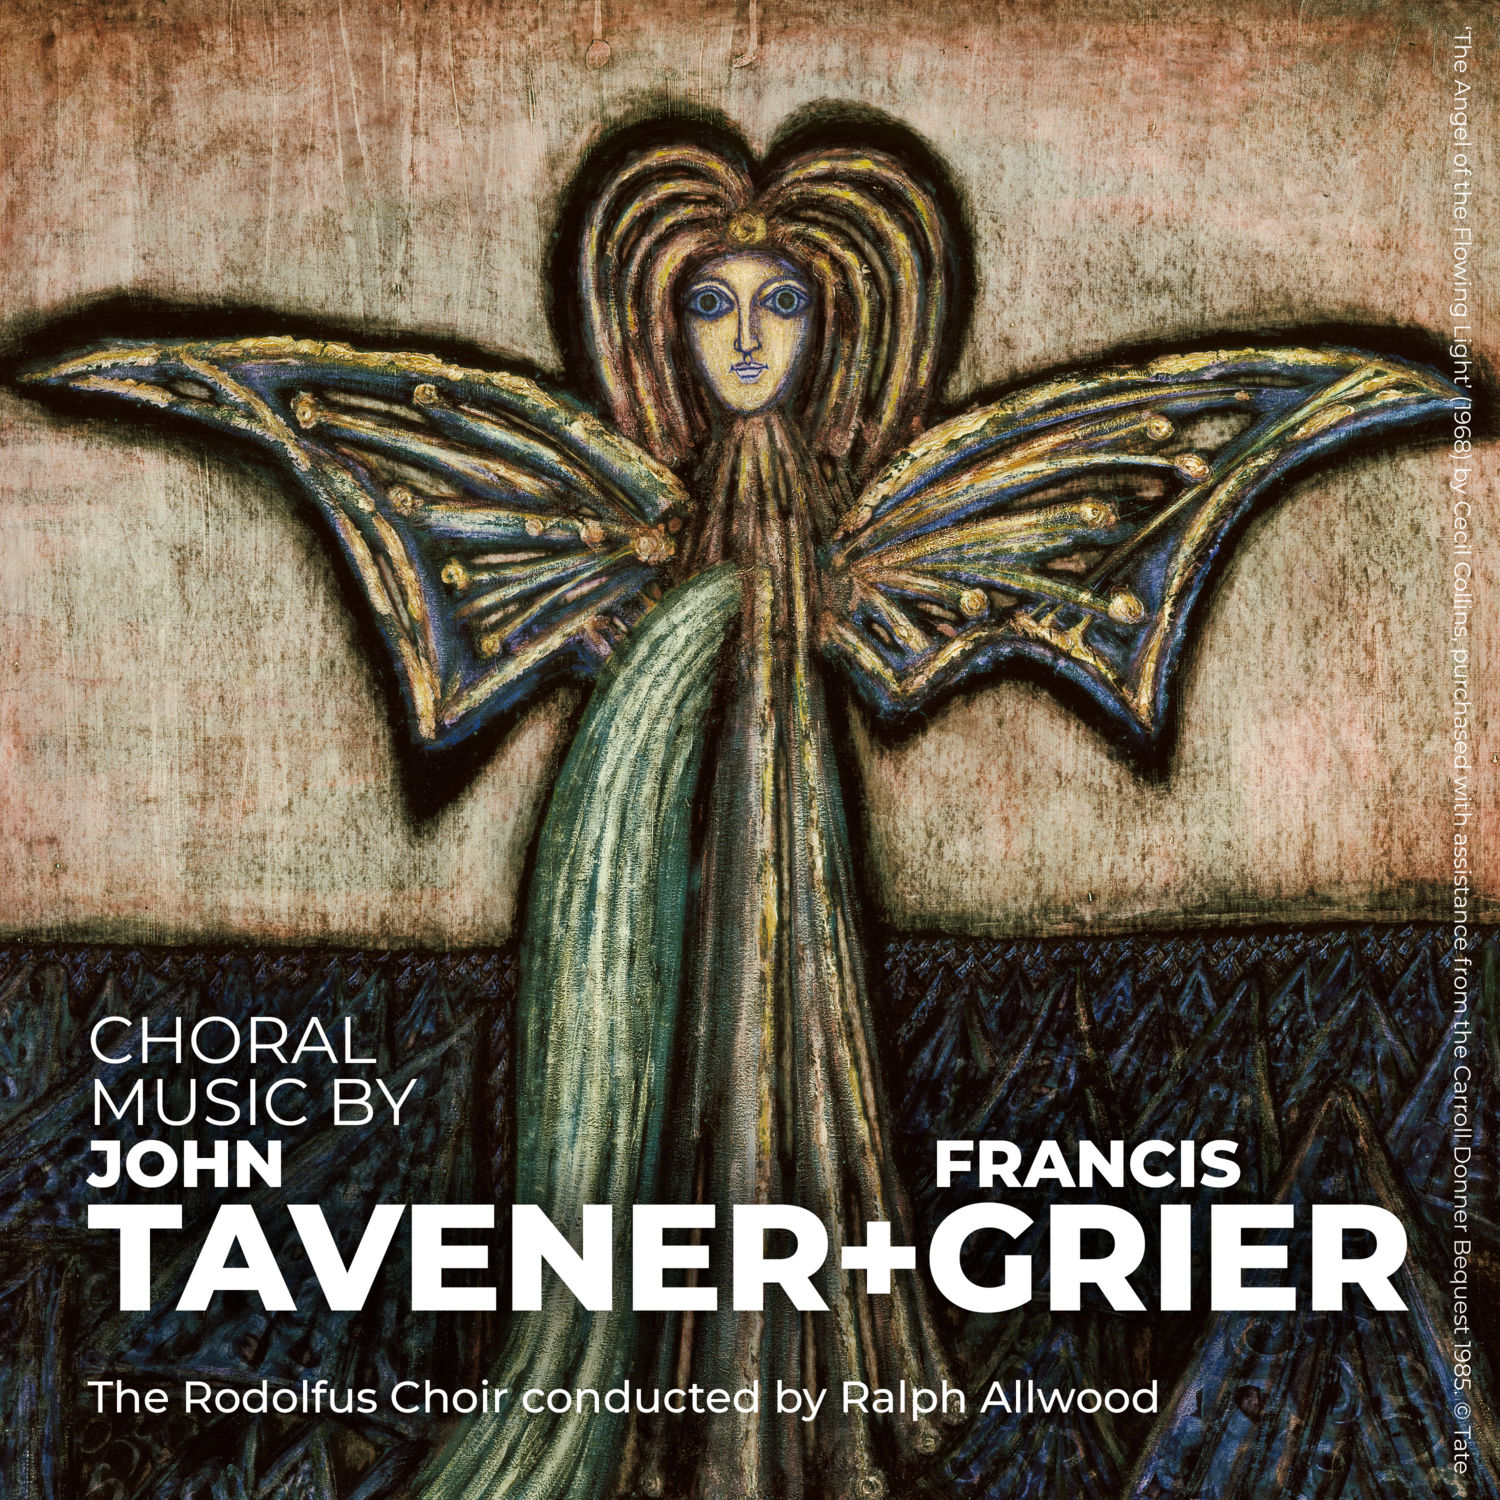 Francis Grier – Choral Music by John Tavener and Francis Grier (2021) [FLAC 24bit/192kHz]